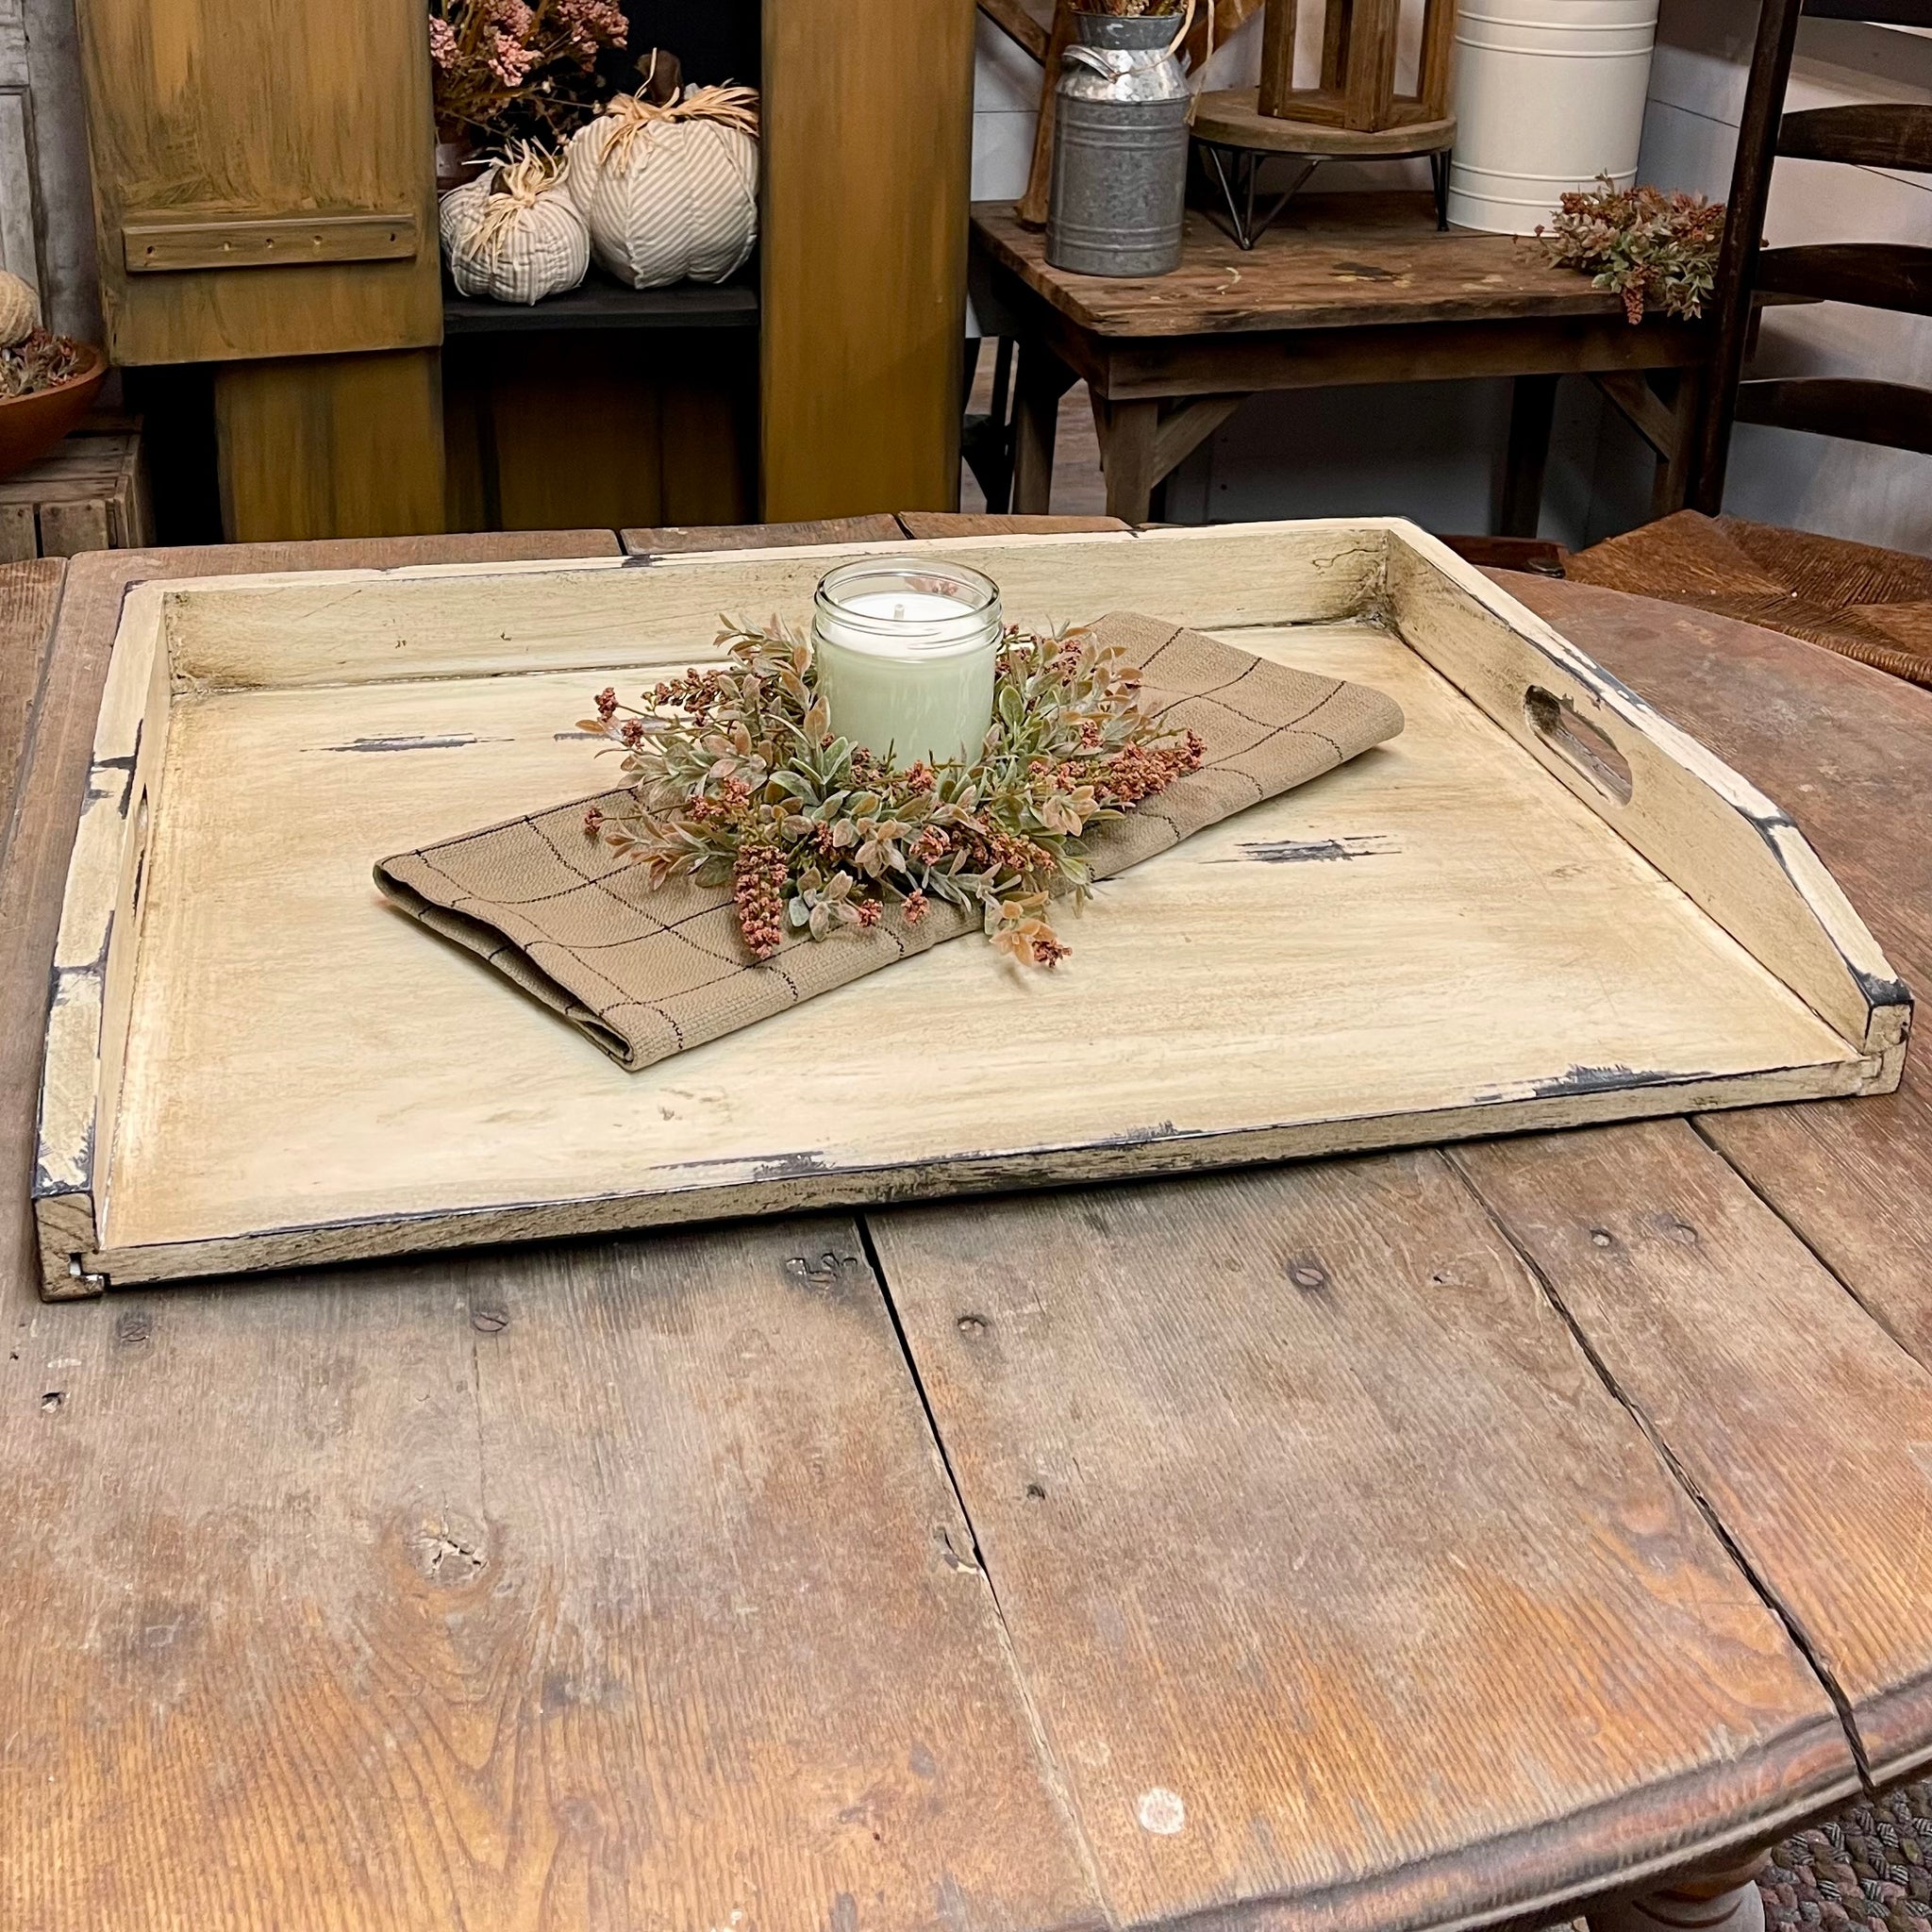 Stove Top Cover w/ FREE Candle Ring -Limited Time! - Rustic Cream